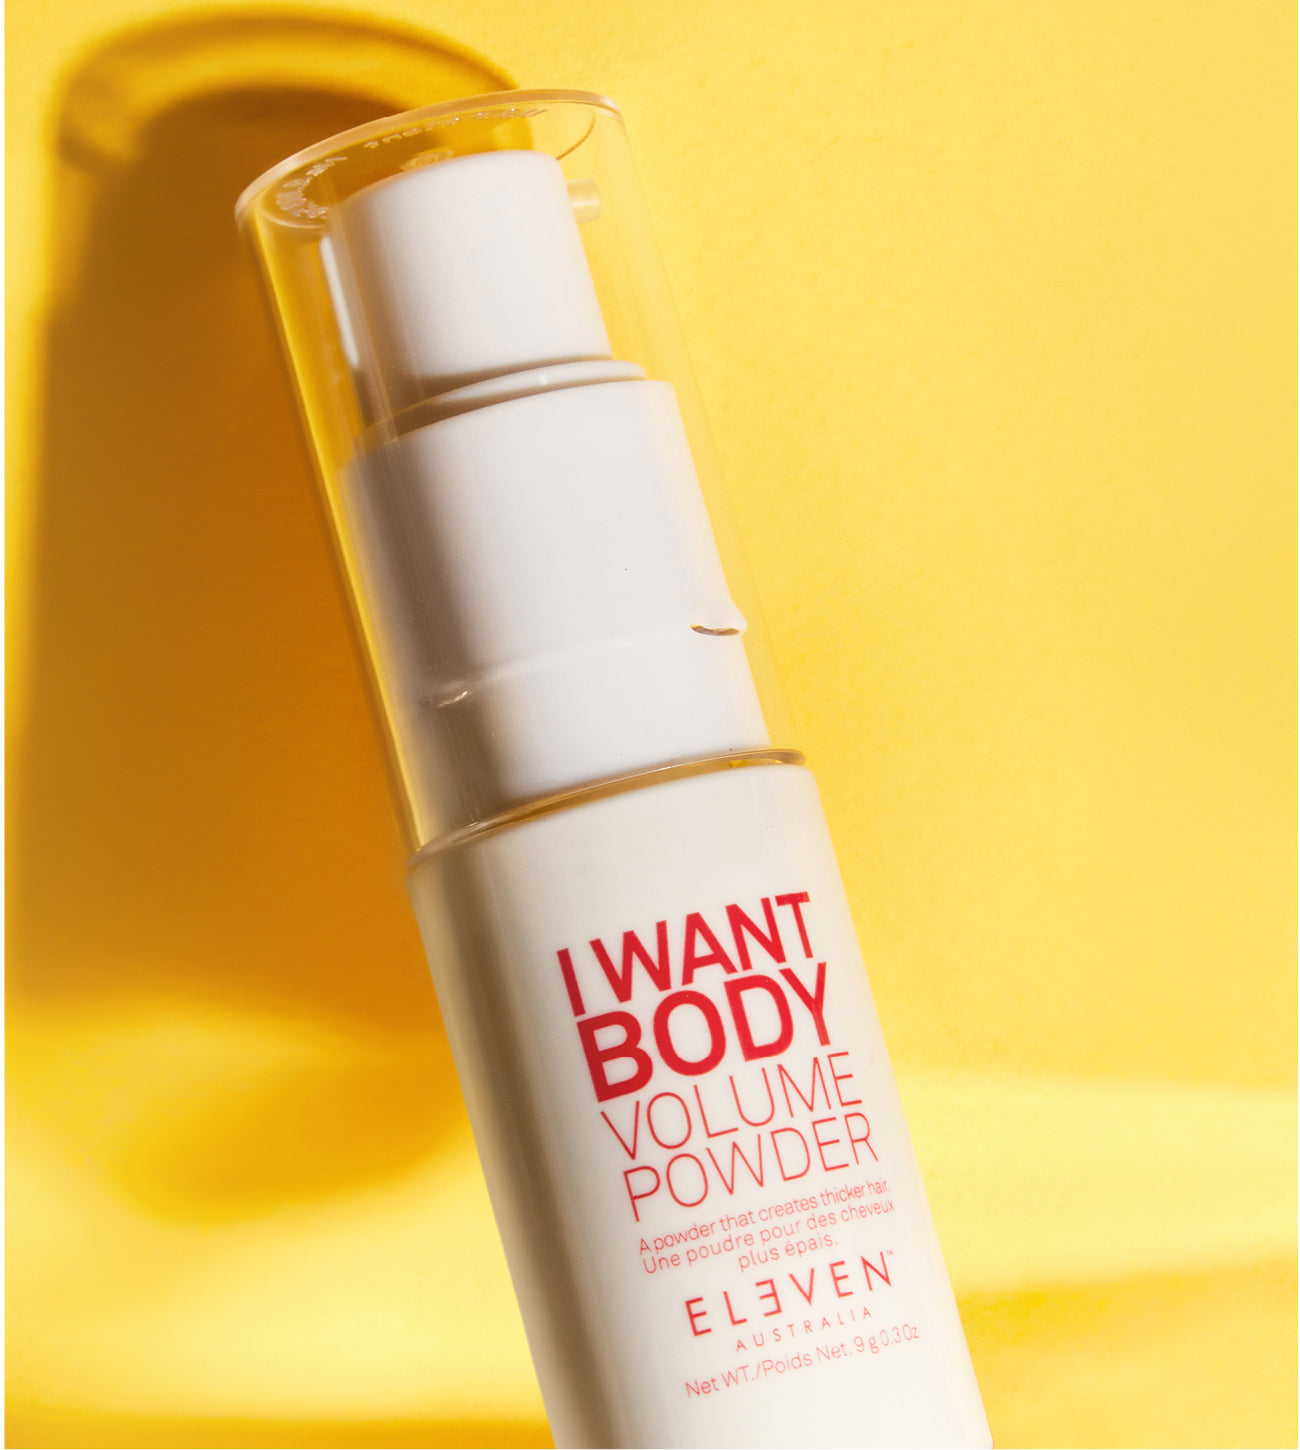 ELEVEN Hair I WANT BODY VOLUME POWDER lift at roots